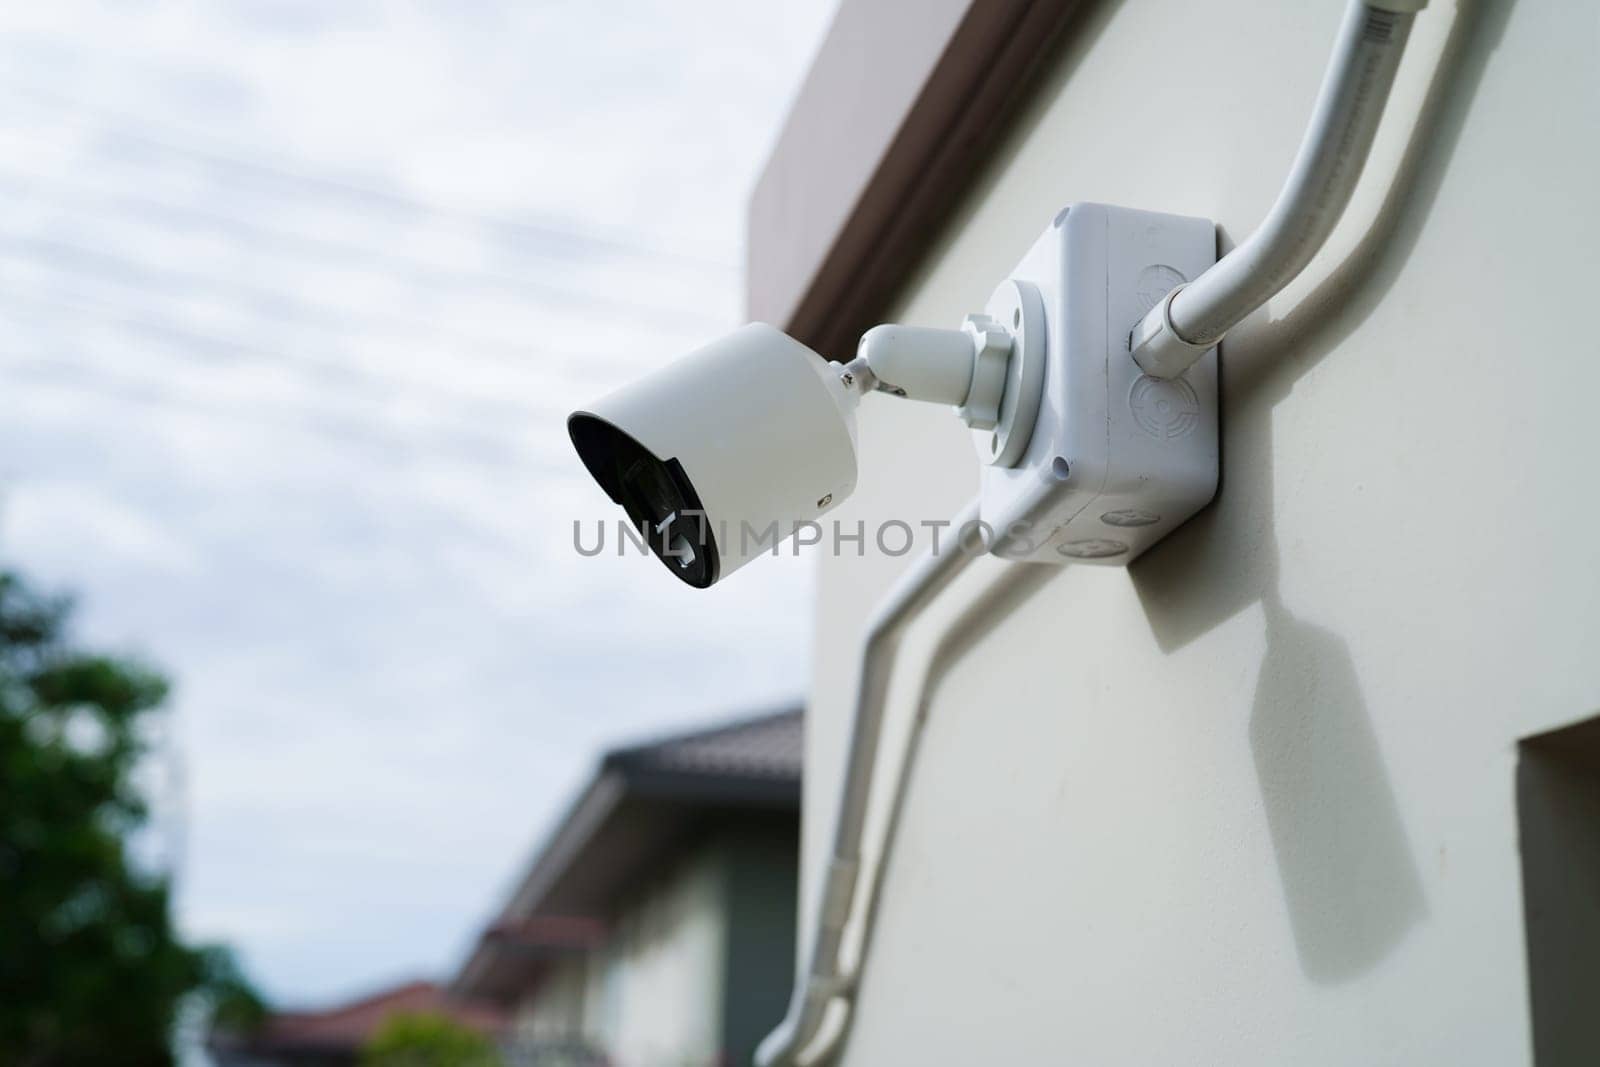 CCTV security camera system outdoor in private house or village, Closed Circuit Television System.